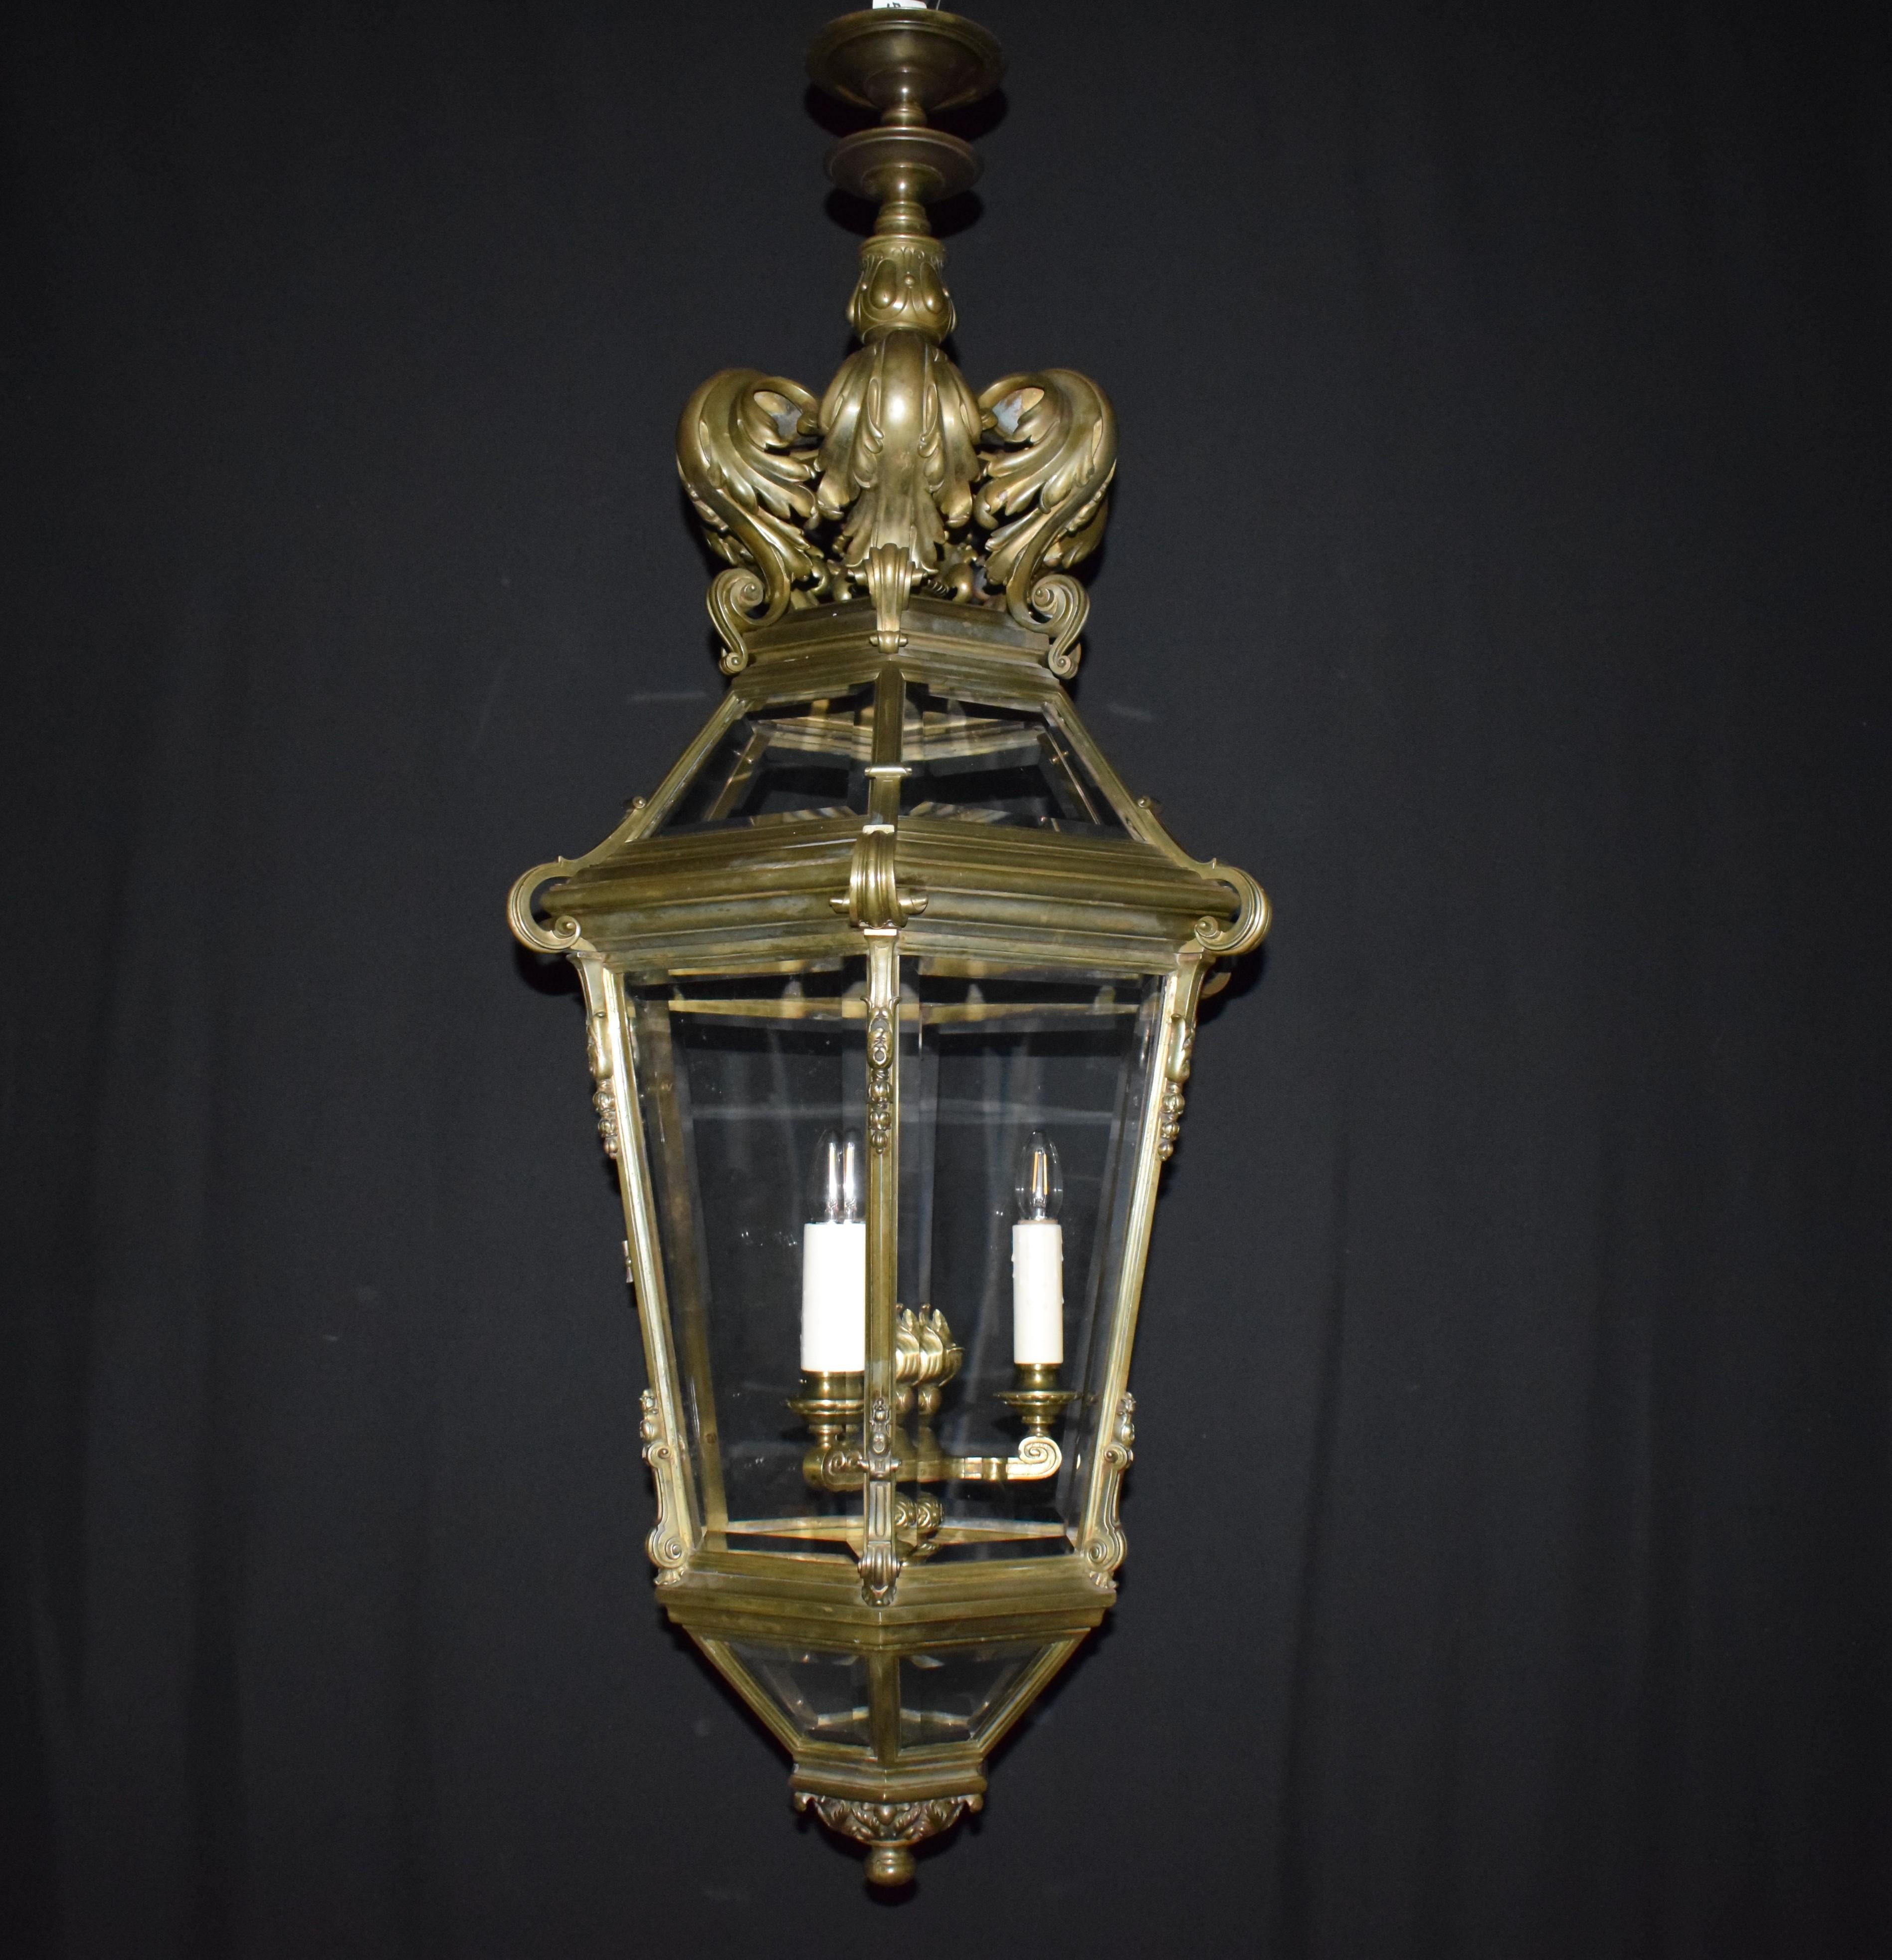 An Exceptional Gilt Bronze Lantern featuring hand beveled glass panels in three rows. Imposing Size. 3 Lights. France, circa 1920.
Dimensions: Height 57